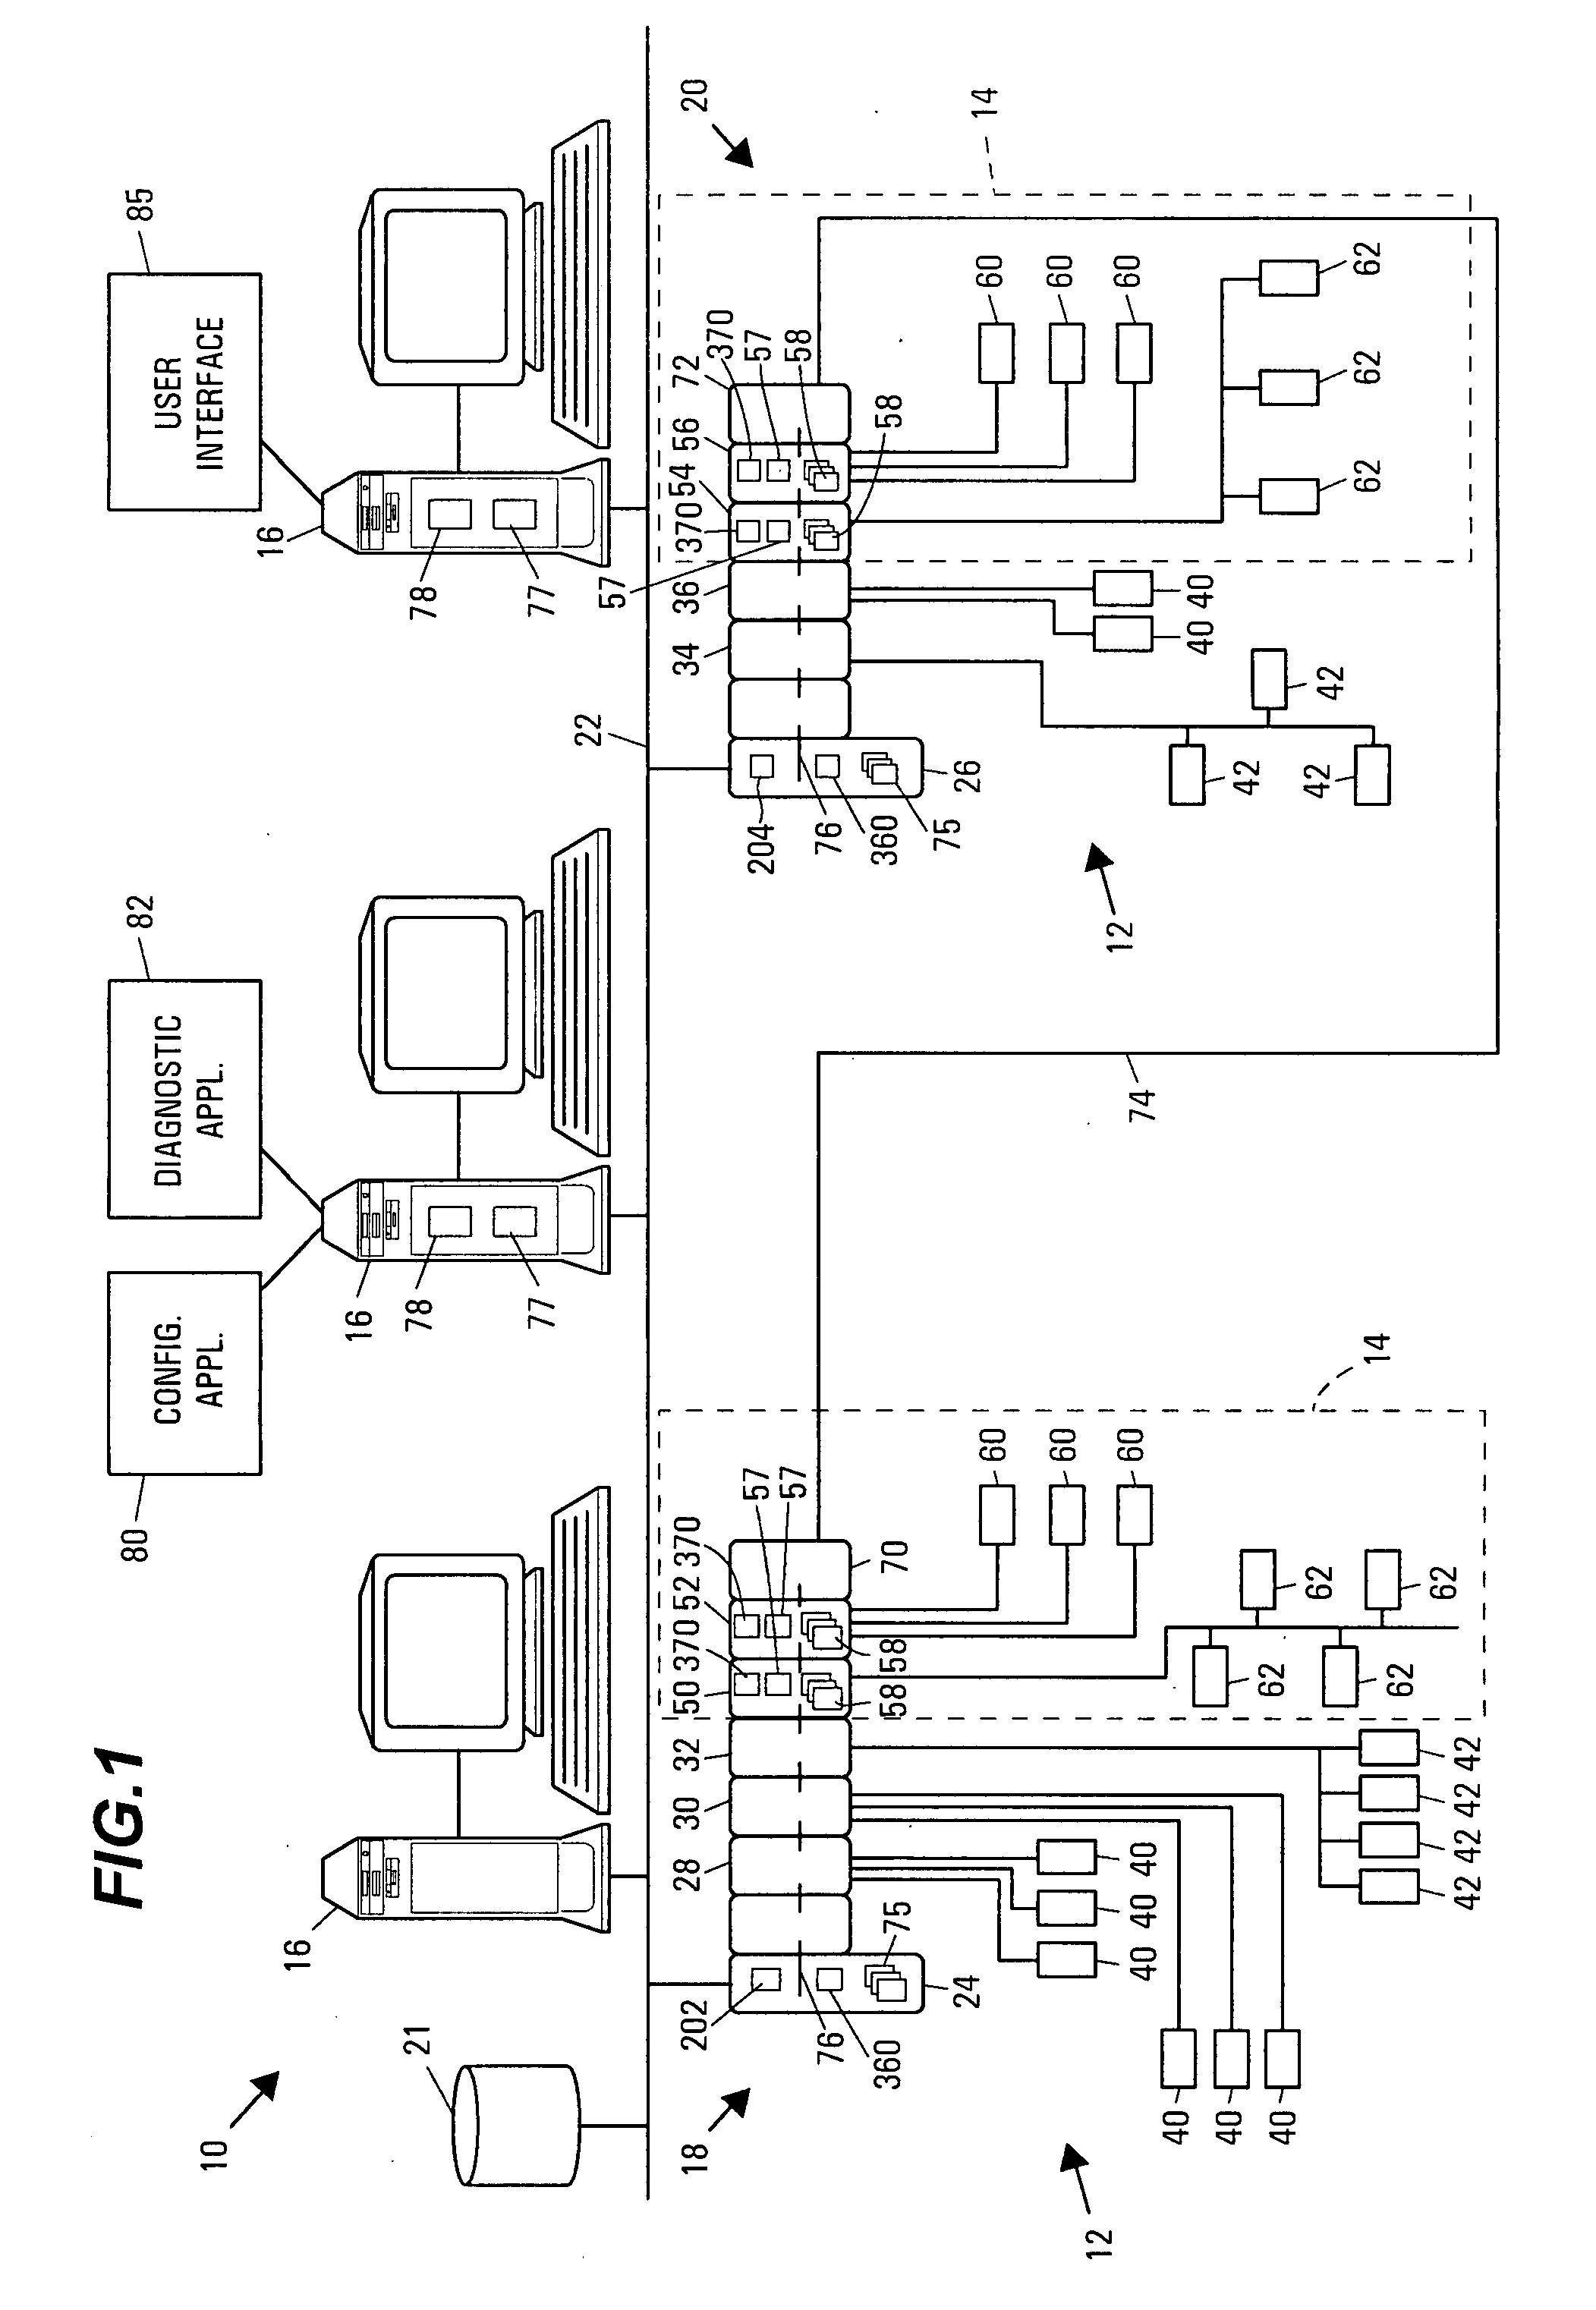 Integrated security in a process plant having a process control system and a safety system